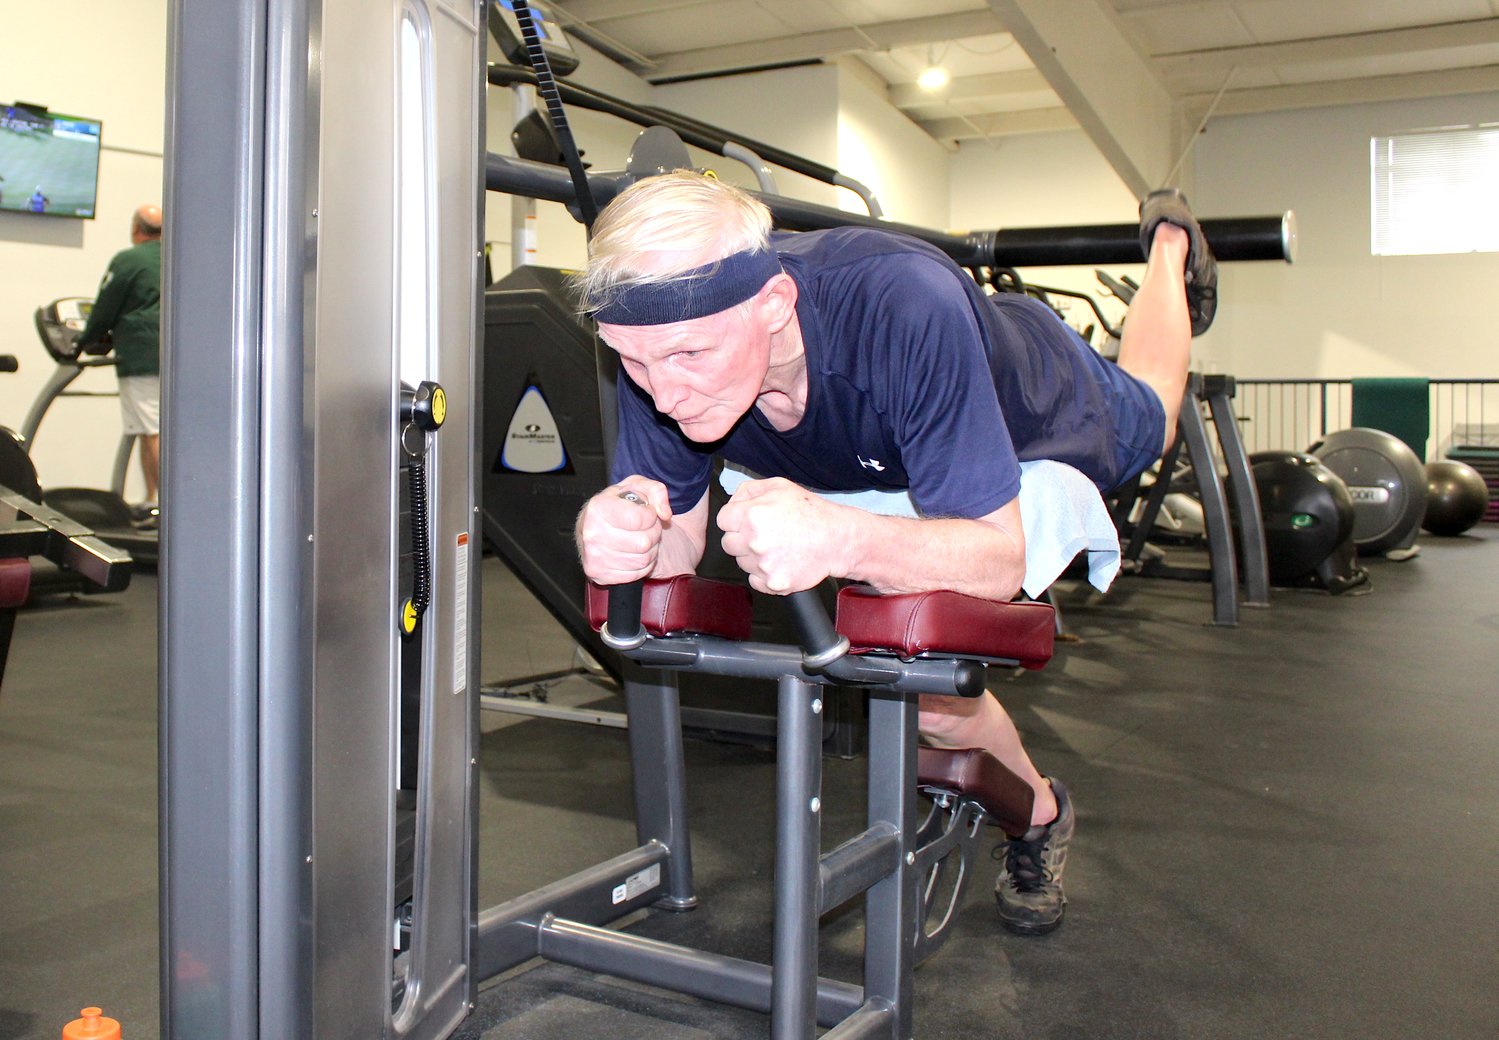 Jack Shaffer, 70, executes his Monday routine at the Crawfordsville Community Center. Originally from Pennsylvania, Shaffer made the move to Crawfordsville in 2007 after retiring from the construction industry to be closer to family and has stayed true to his six-days-a-week workout regimen since 2009.